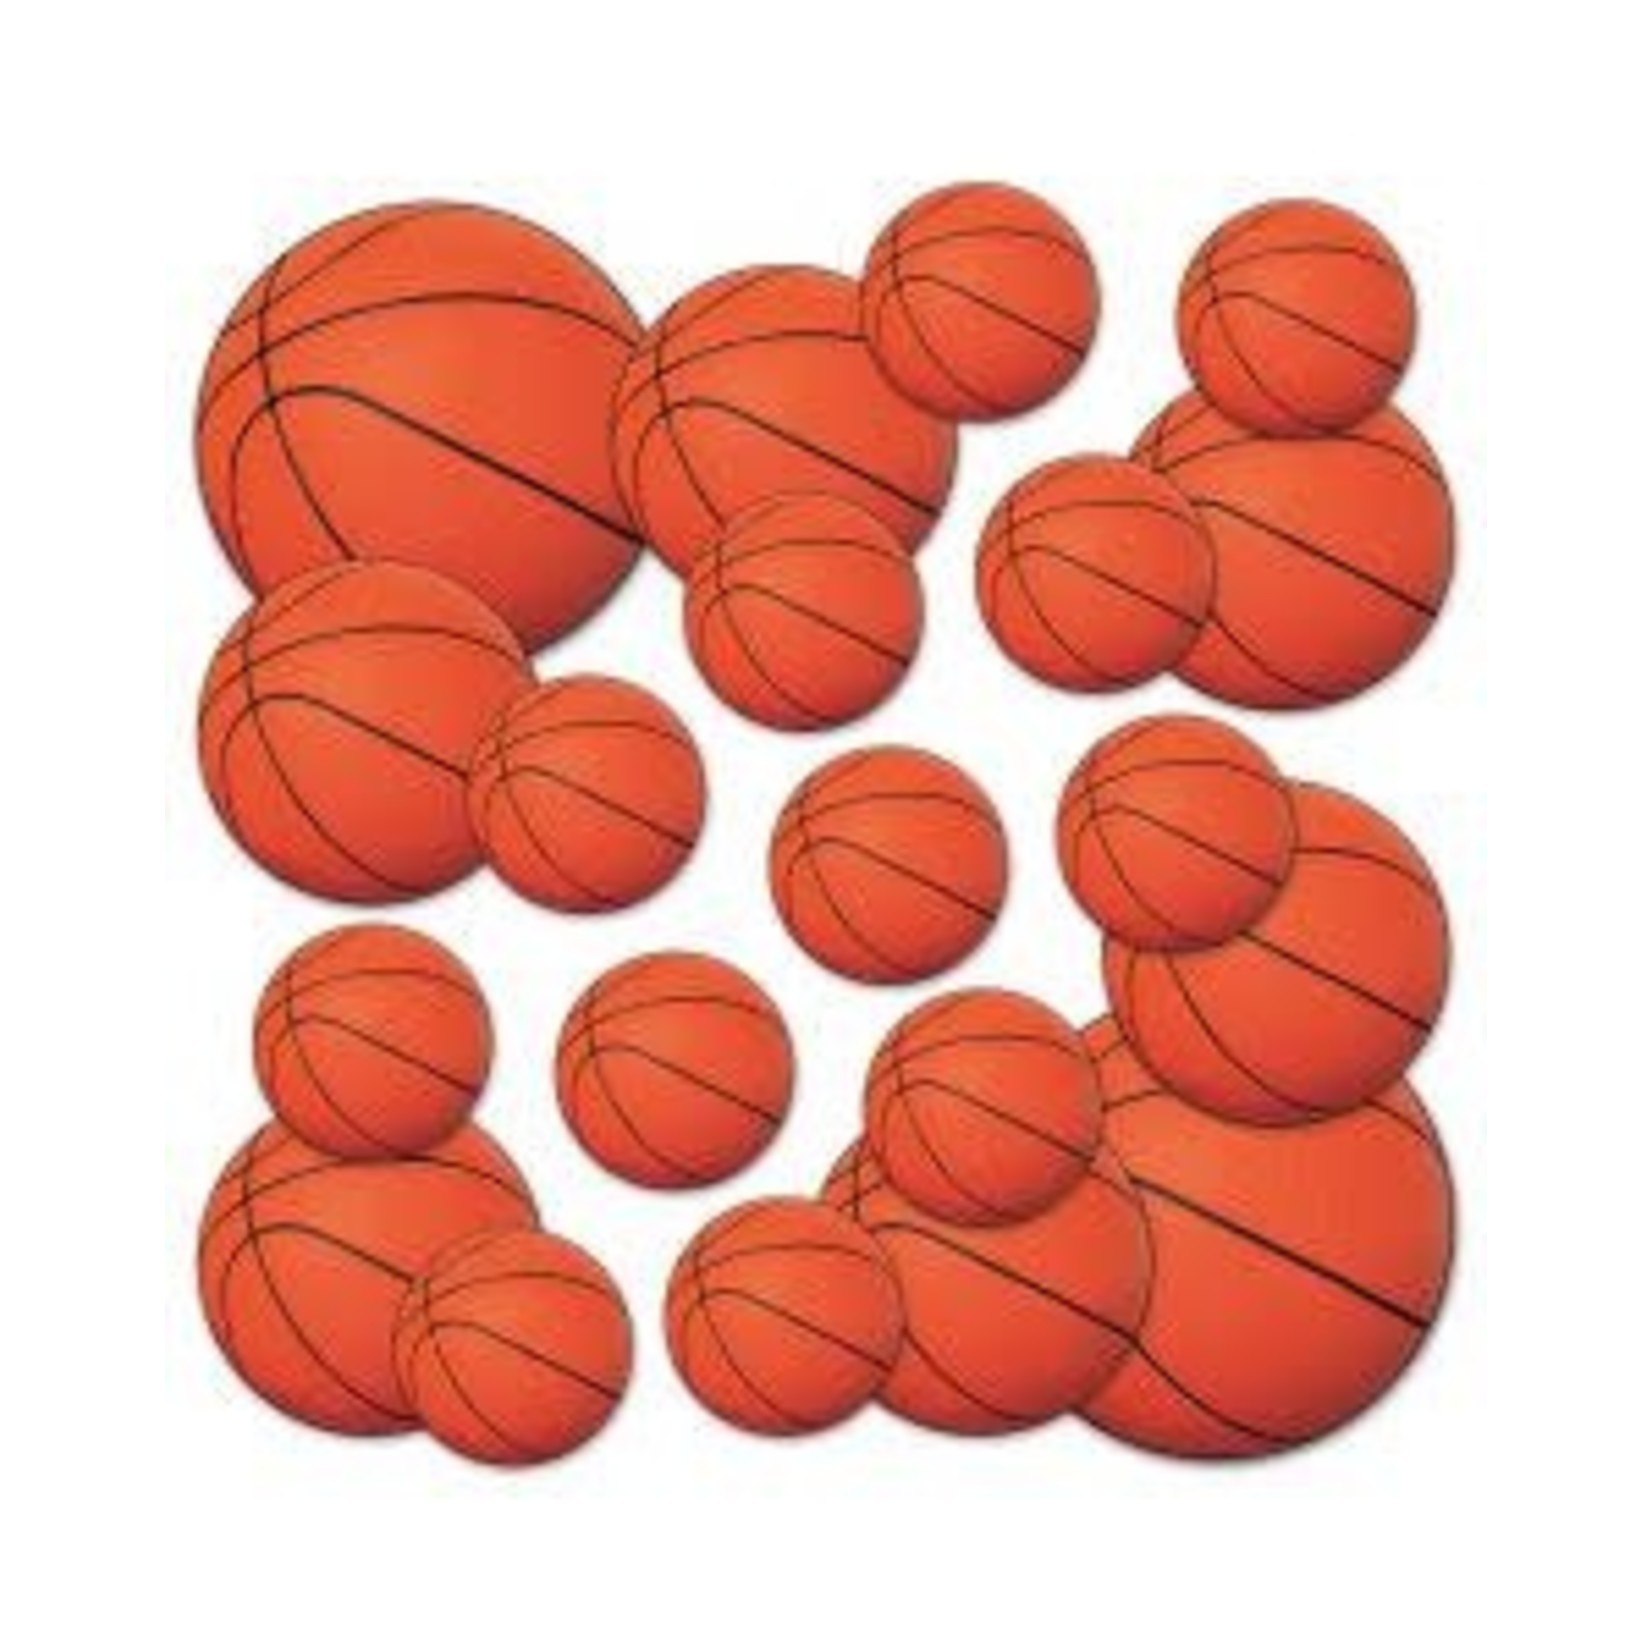 Beistle Basketball Assorted Sized Cutouts - 20ct.